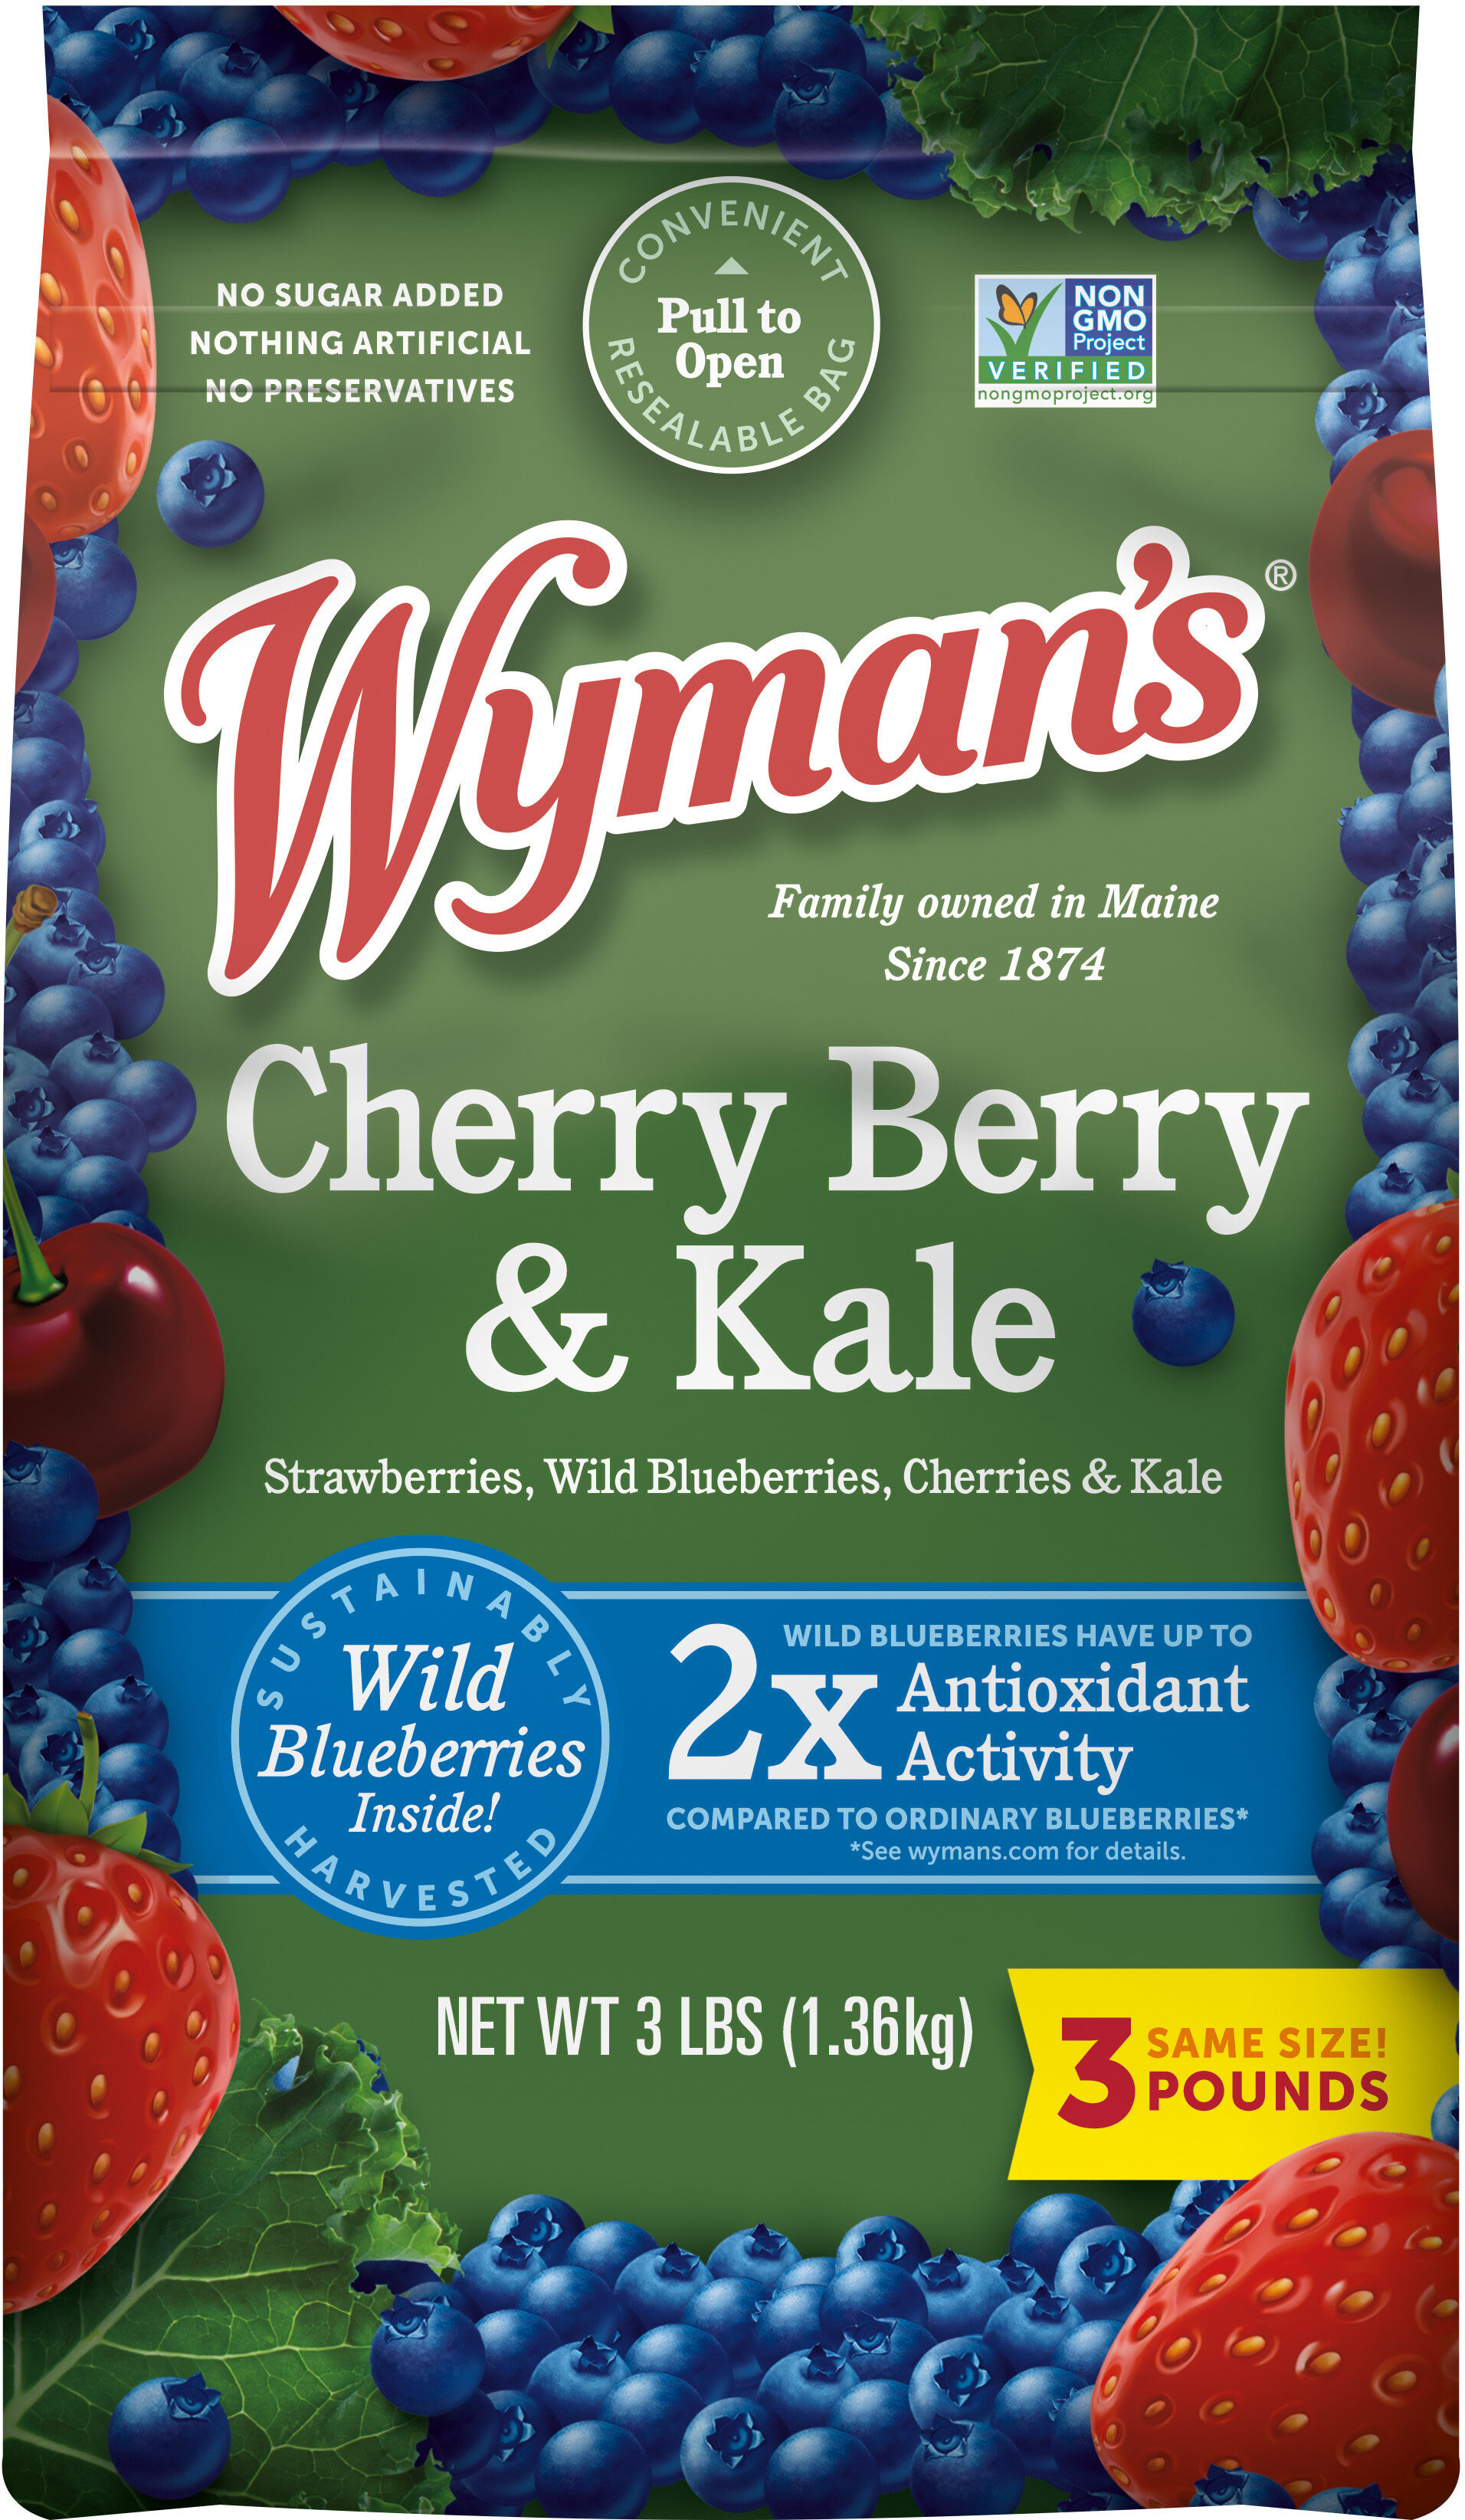 Frozen strawberries, blueberries & cherries with kale - Product